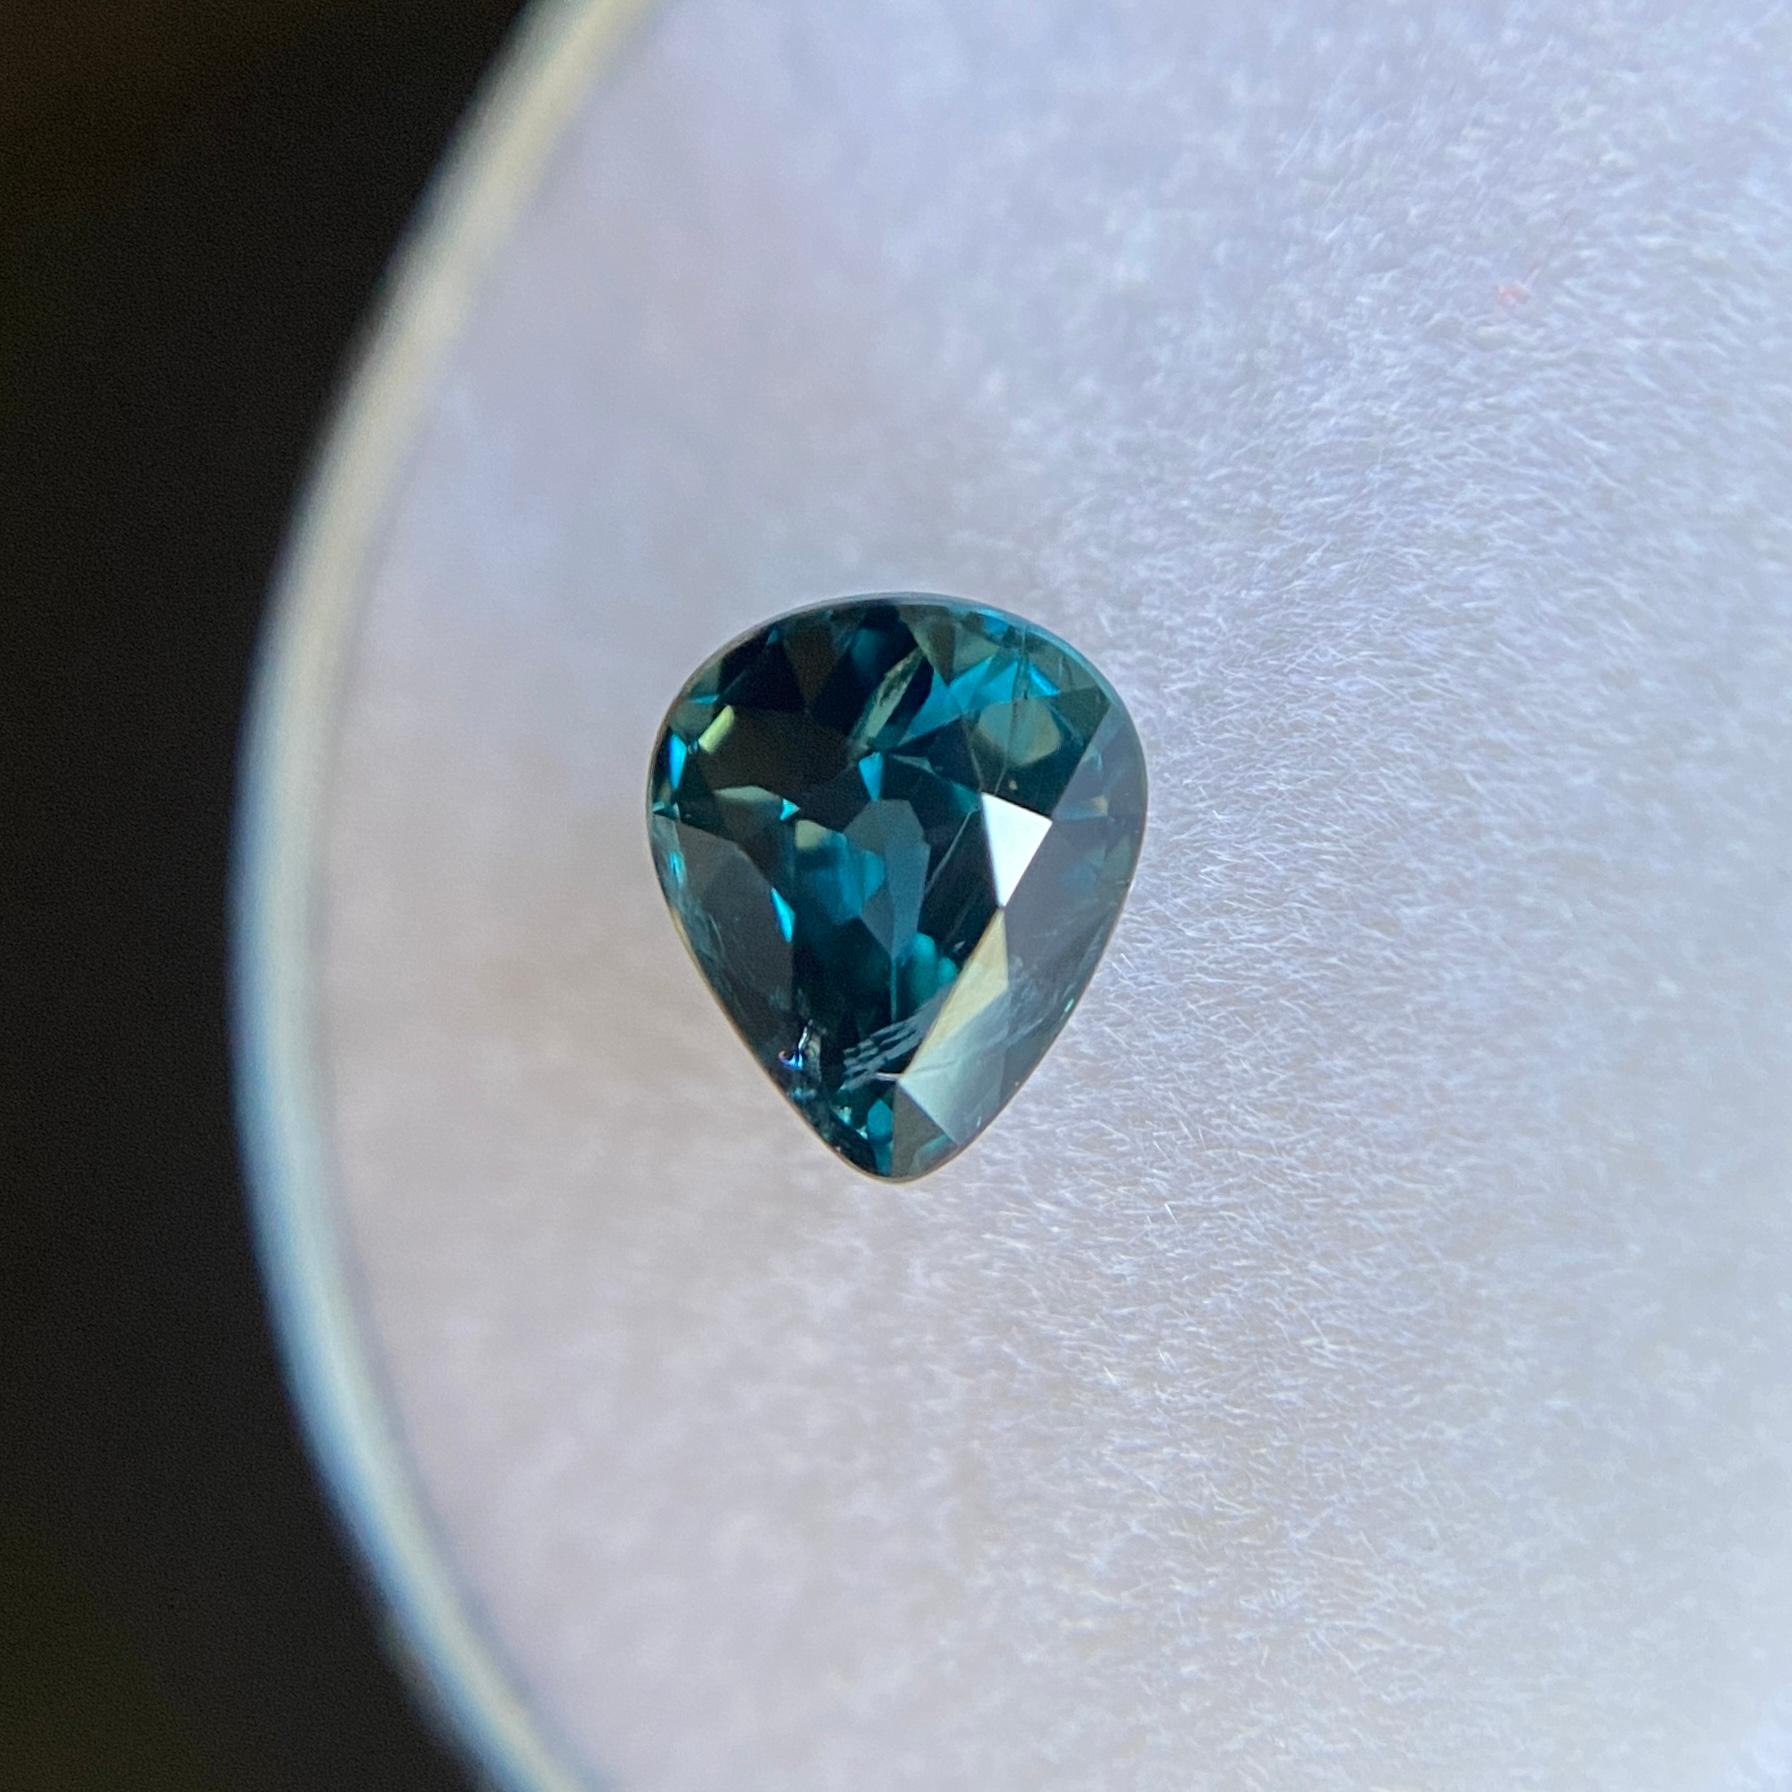 GIA Certifier Fine Blue Untreated Sapphire Gemstone.

Unheated blue sapphire with a beautiful deep blue colour.

Fully certified by GIA confirming stone as natural and untreated. Very rare for natural sapphires.

1.19 Carat with good clarity,